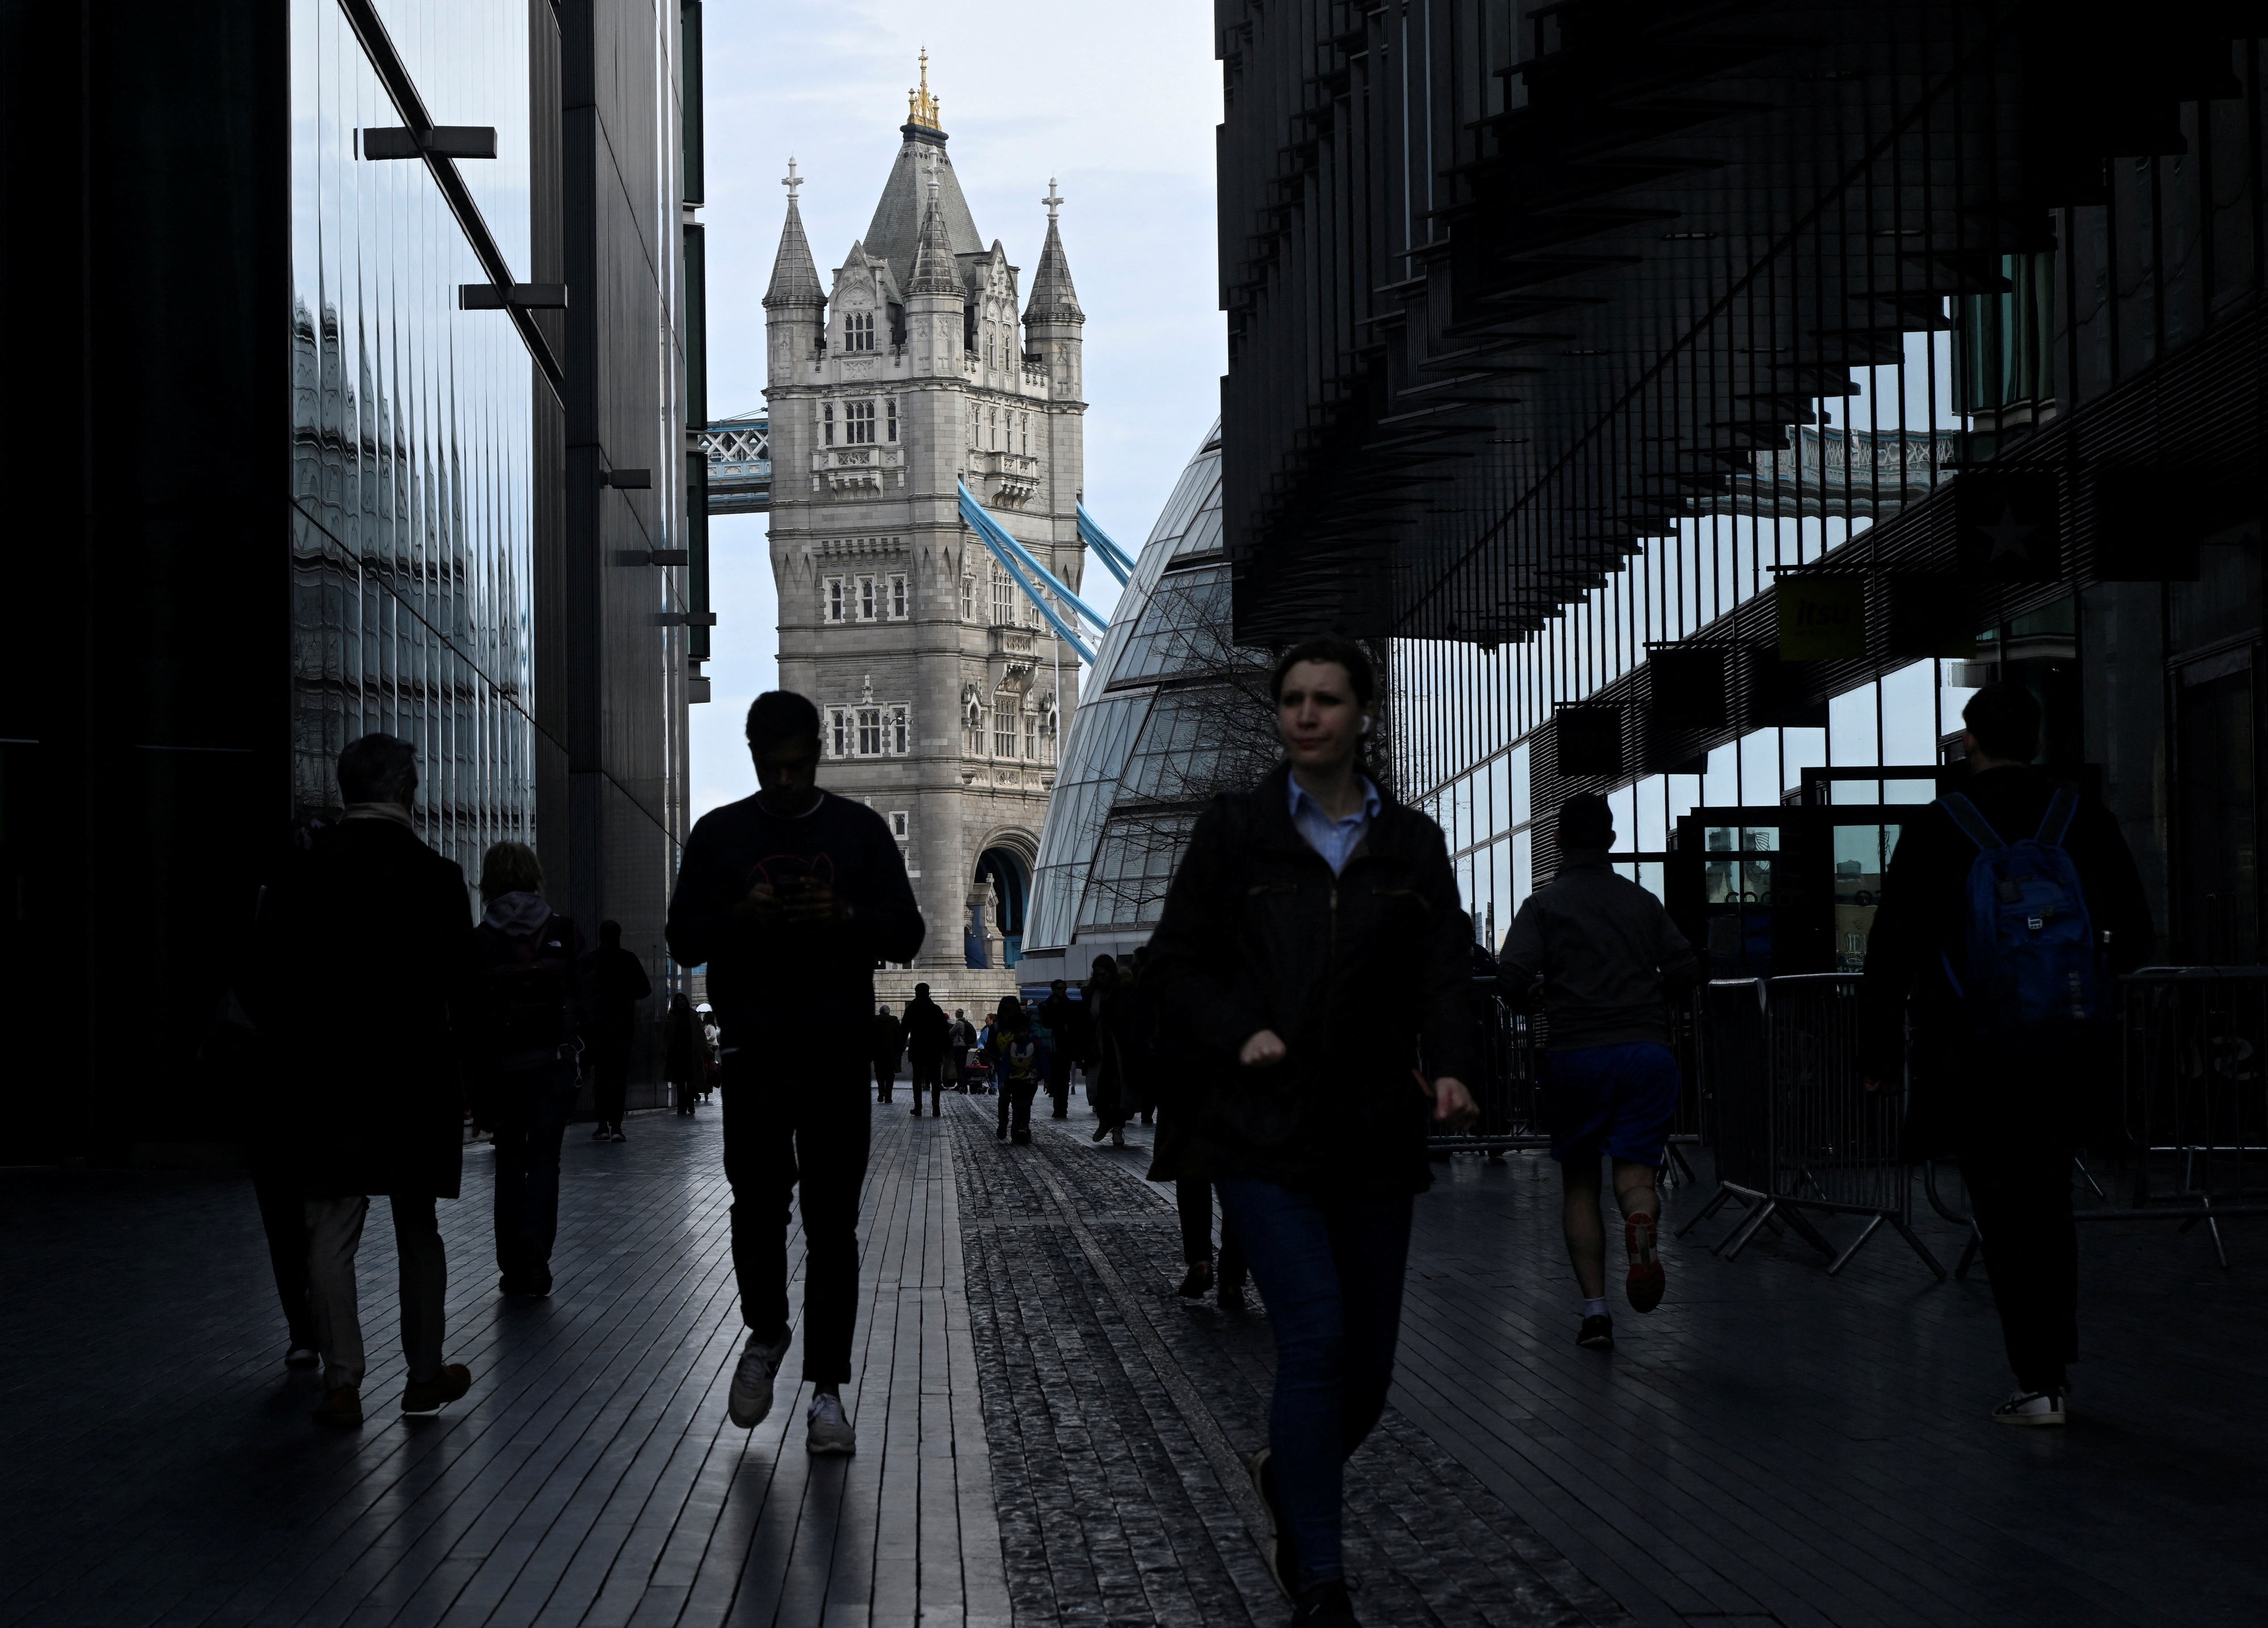 People walk through the 'More London' business district with Tower Bridge seen behind in London